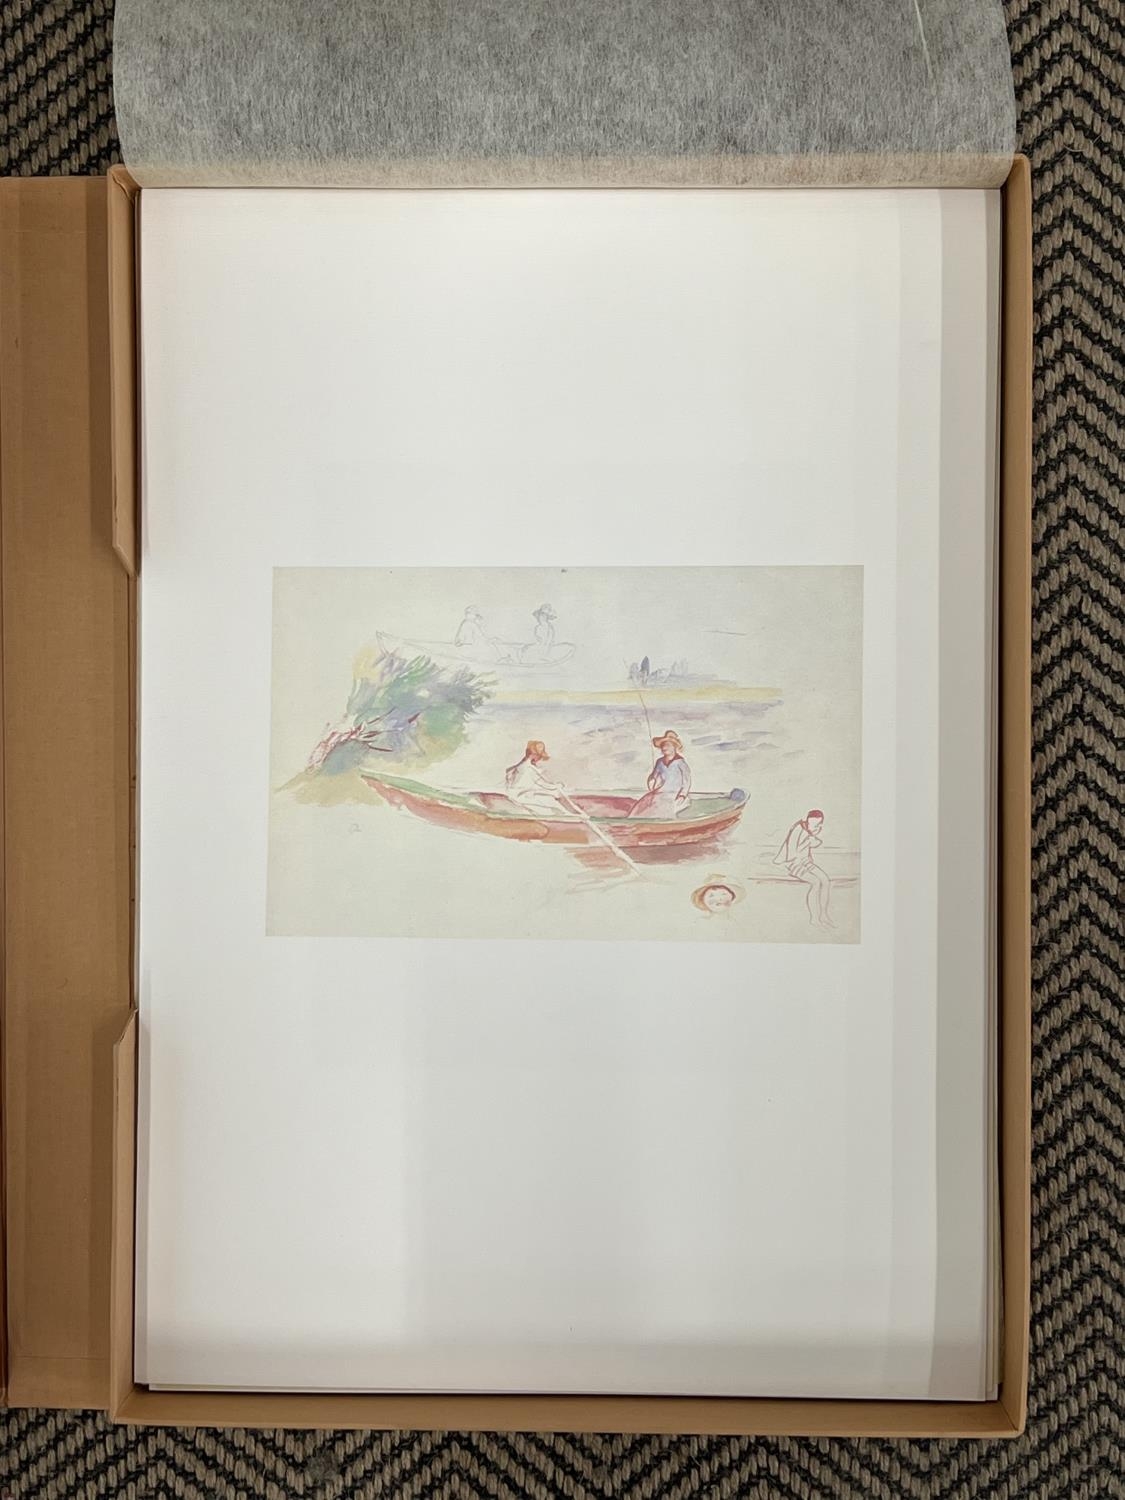 AFTER PIERRE AUGUSTE RENOIR, a folio of 24 off-set lithographs printed by Cartiere Miliani di - Image 16 of 28